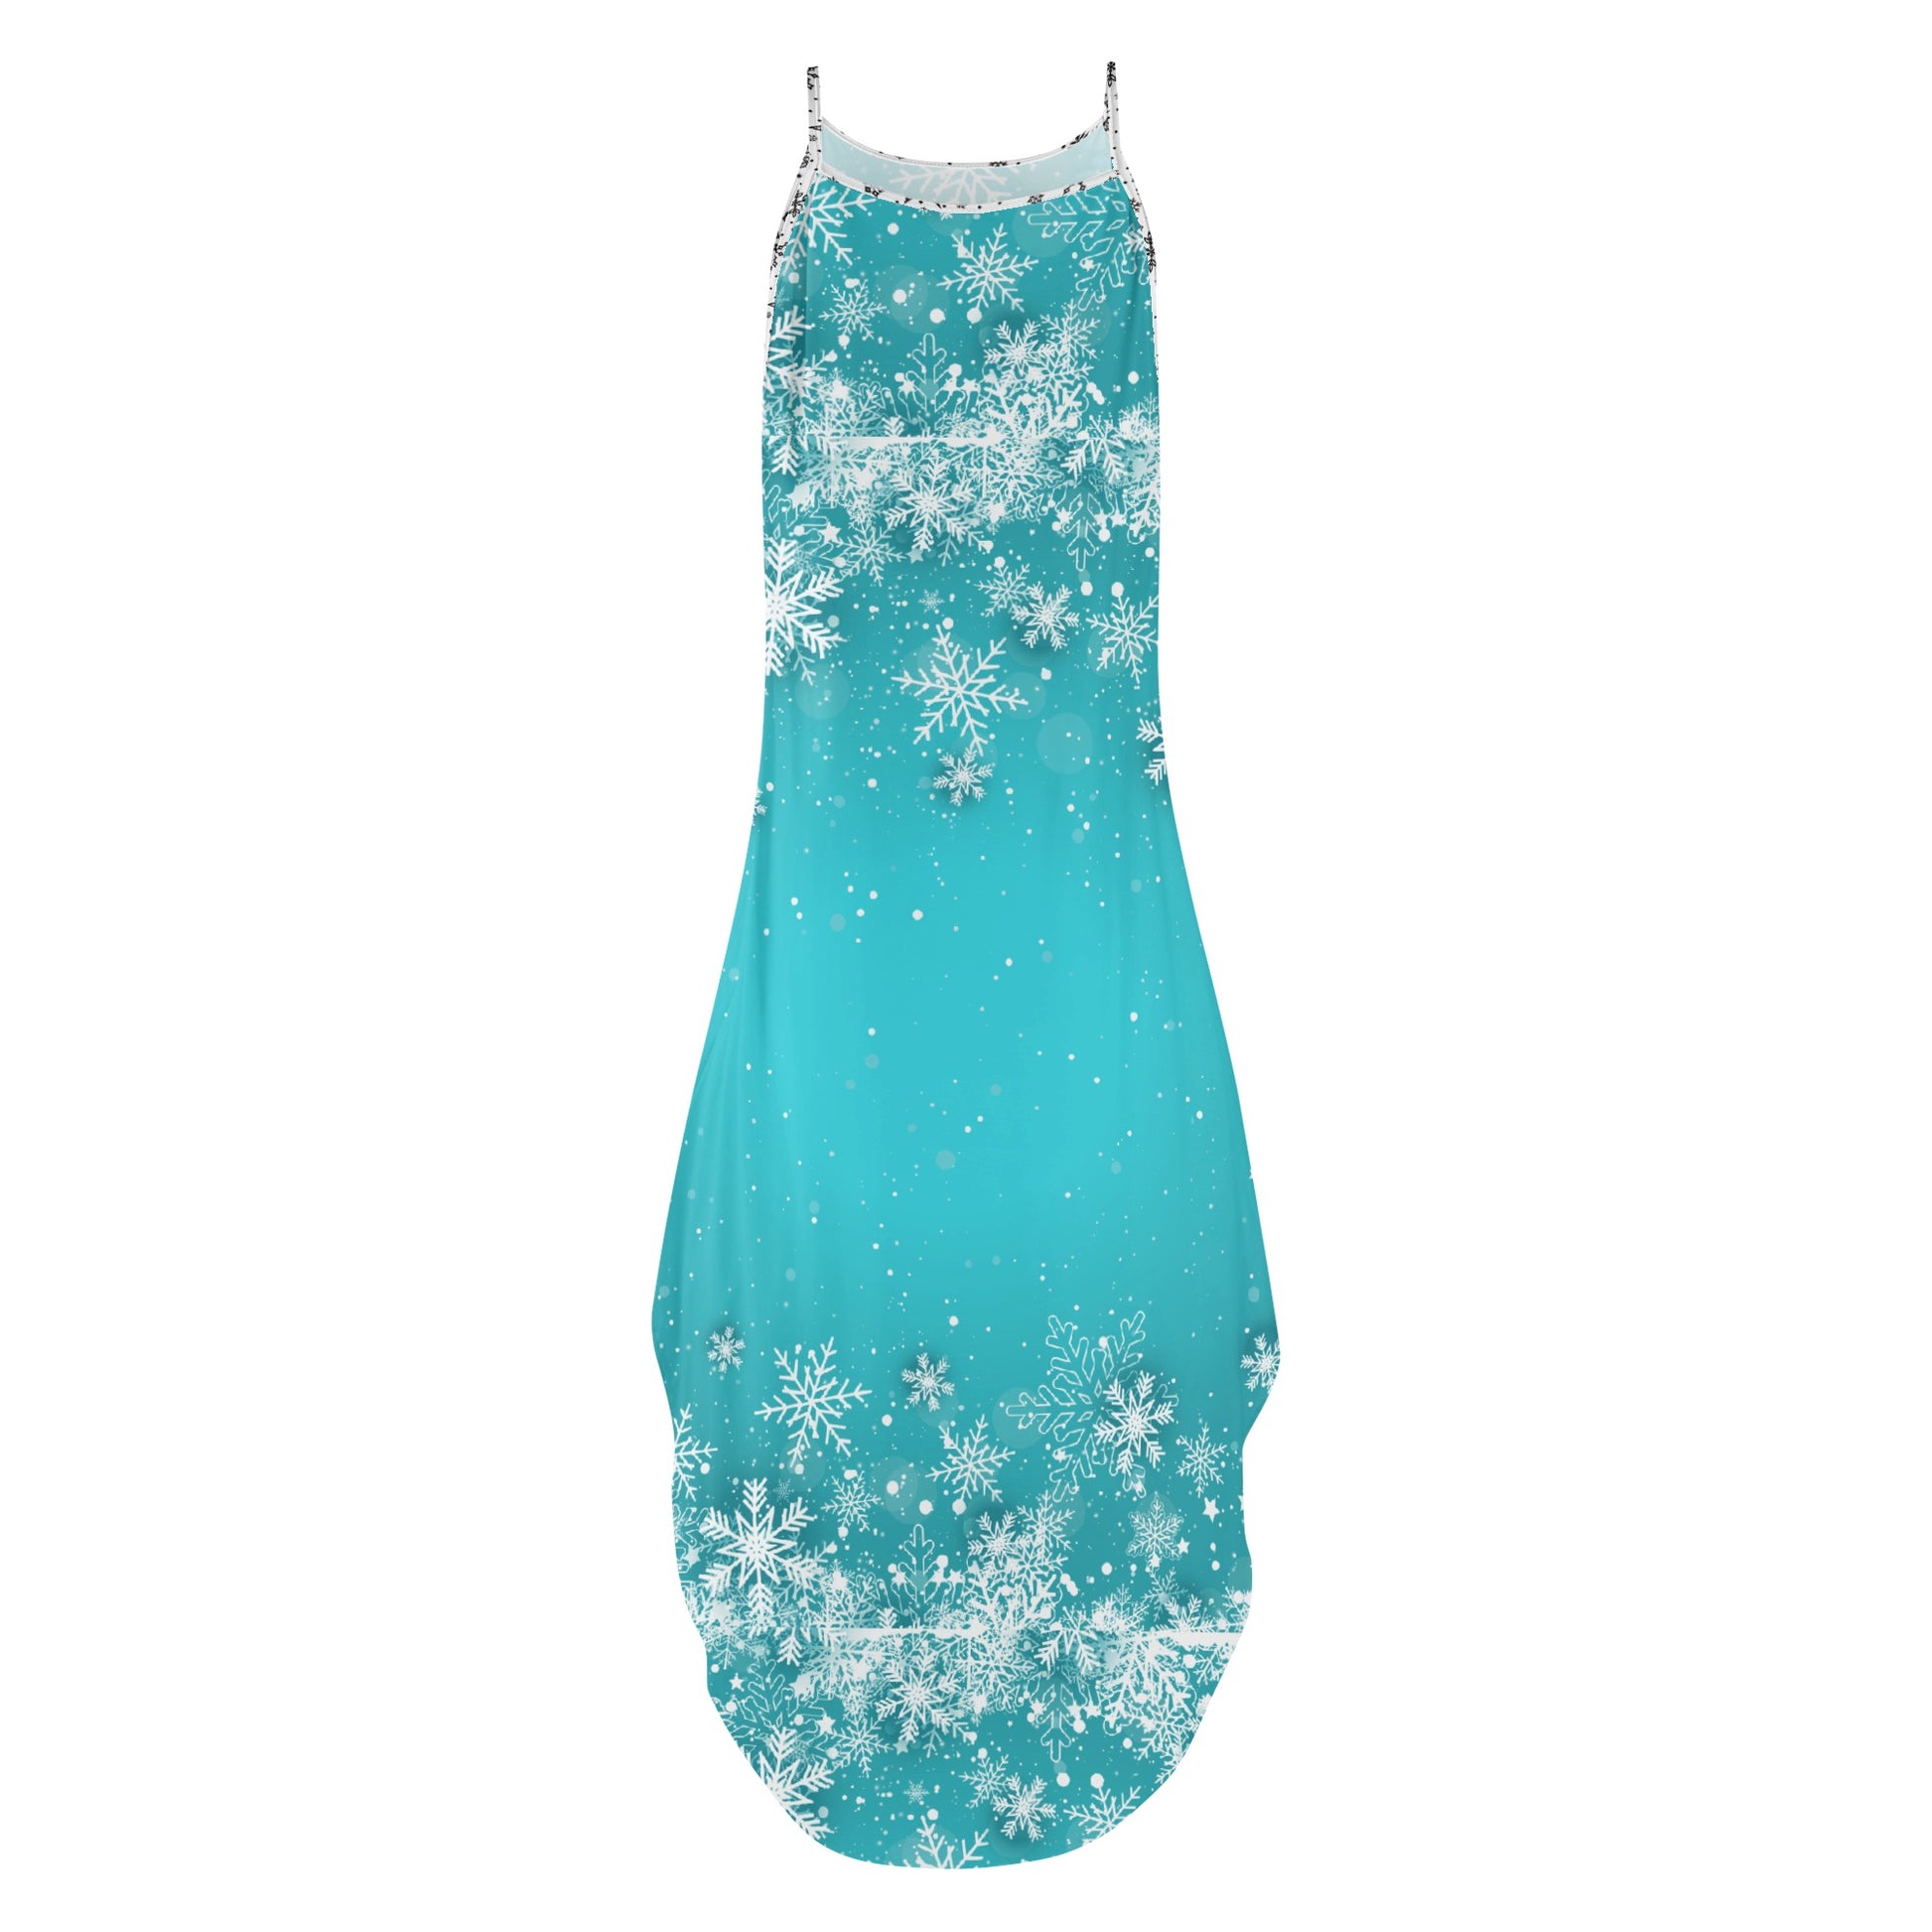 Stand out  with the  Frost BiteWomens Elegant Sleeveless  Dress  available at Hey Nugget. Grab yours today!